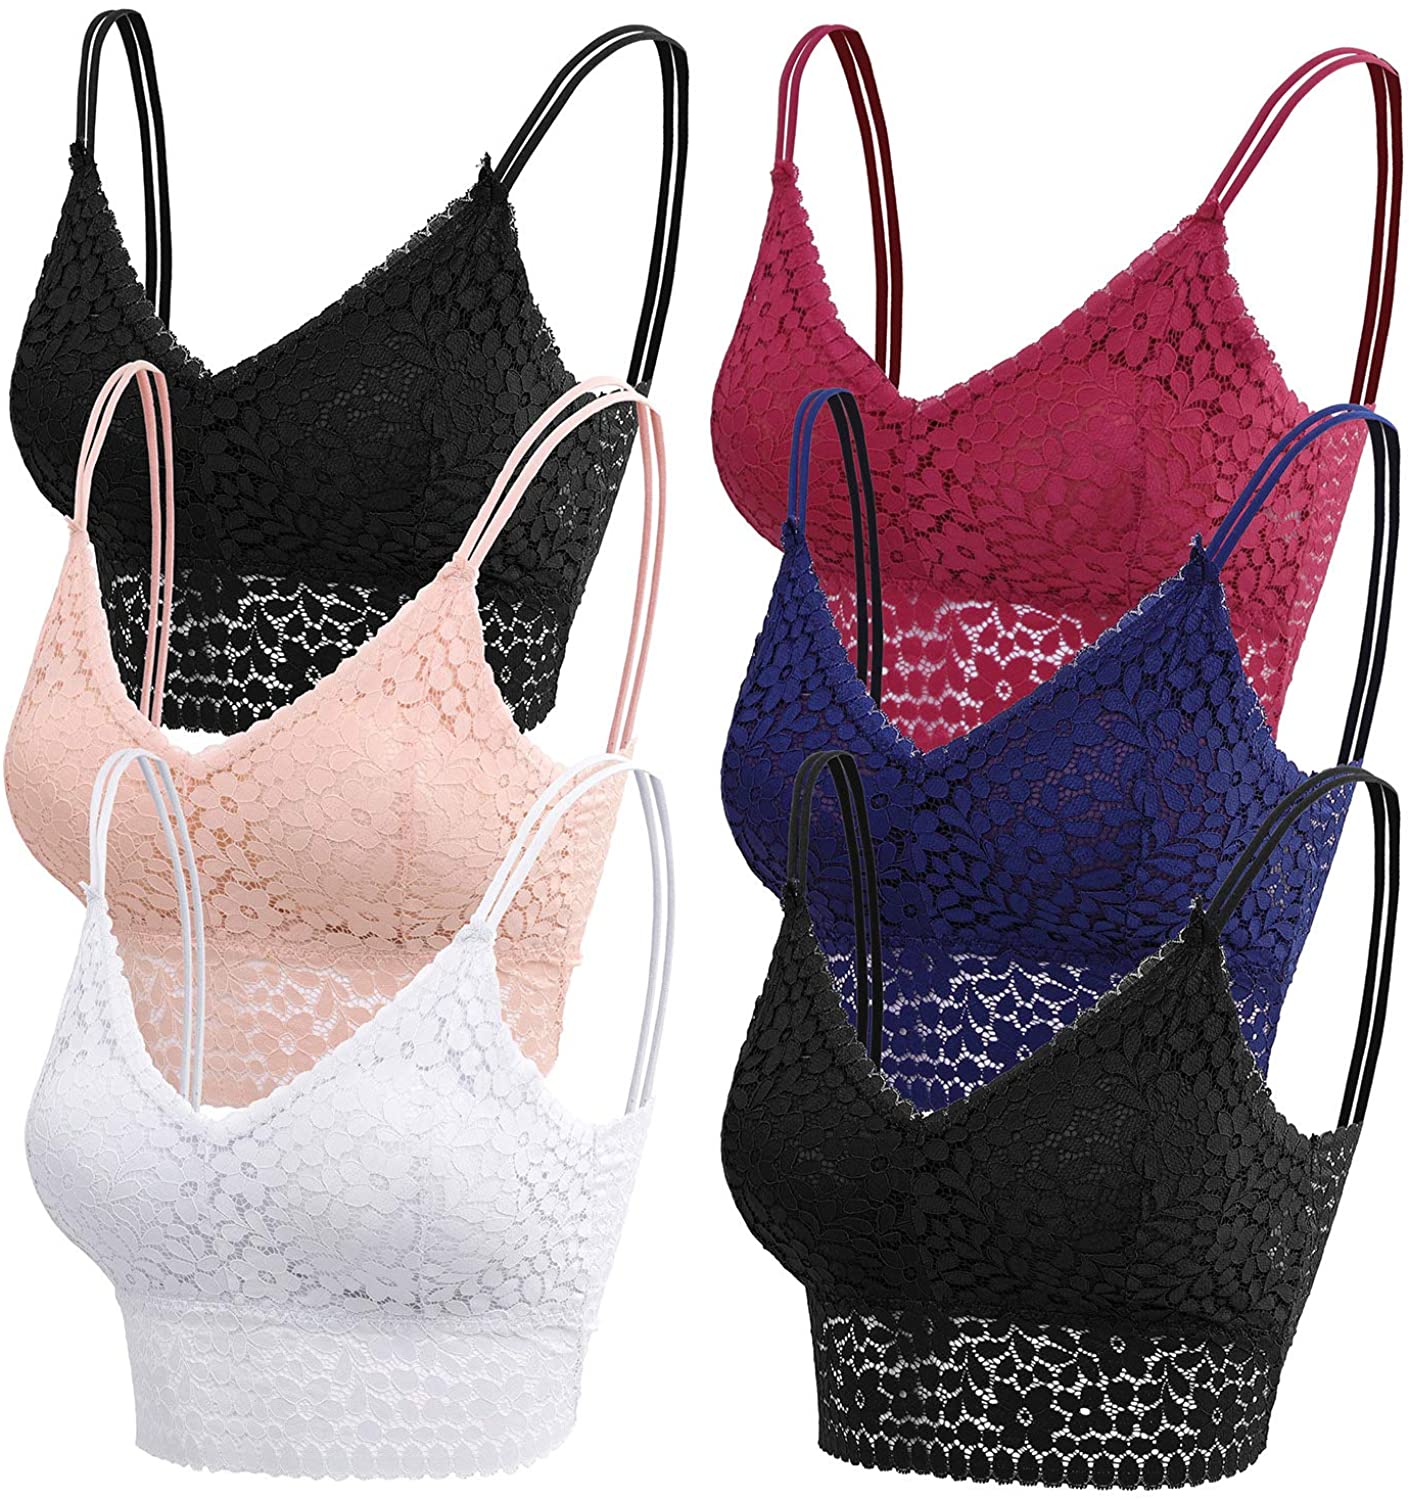 Price:$16.99 URATOT 6 Pieces Lace Bralettes for Women Girls Lace Daily Cami Bra with Removable Pads at Amazon Women’s Clothing store